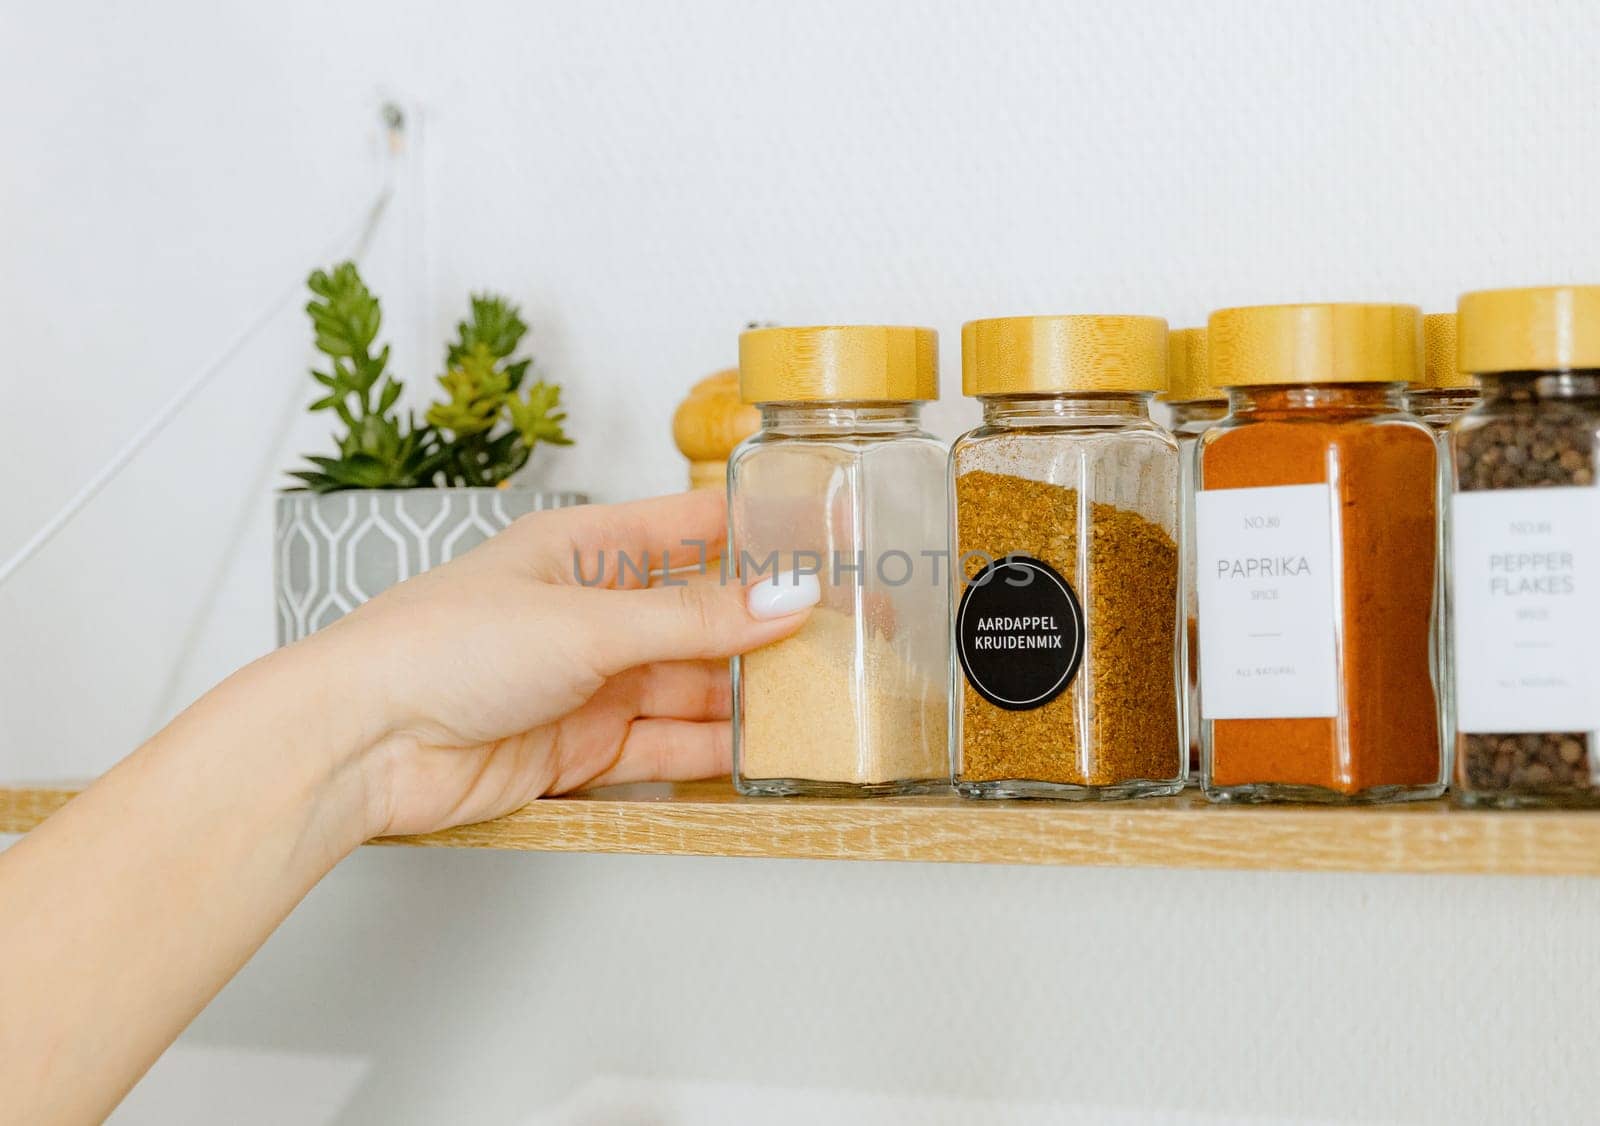 The girl takes a jar of spice from the shelf. by Nataliya